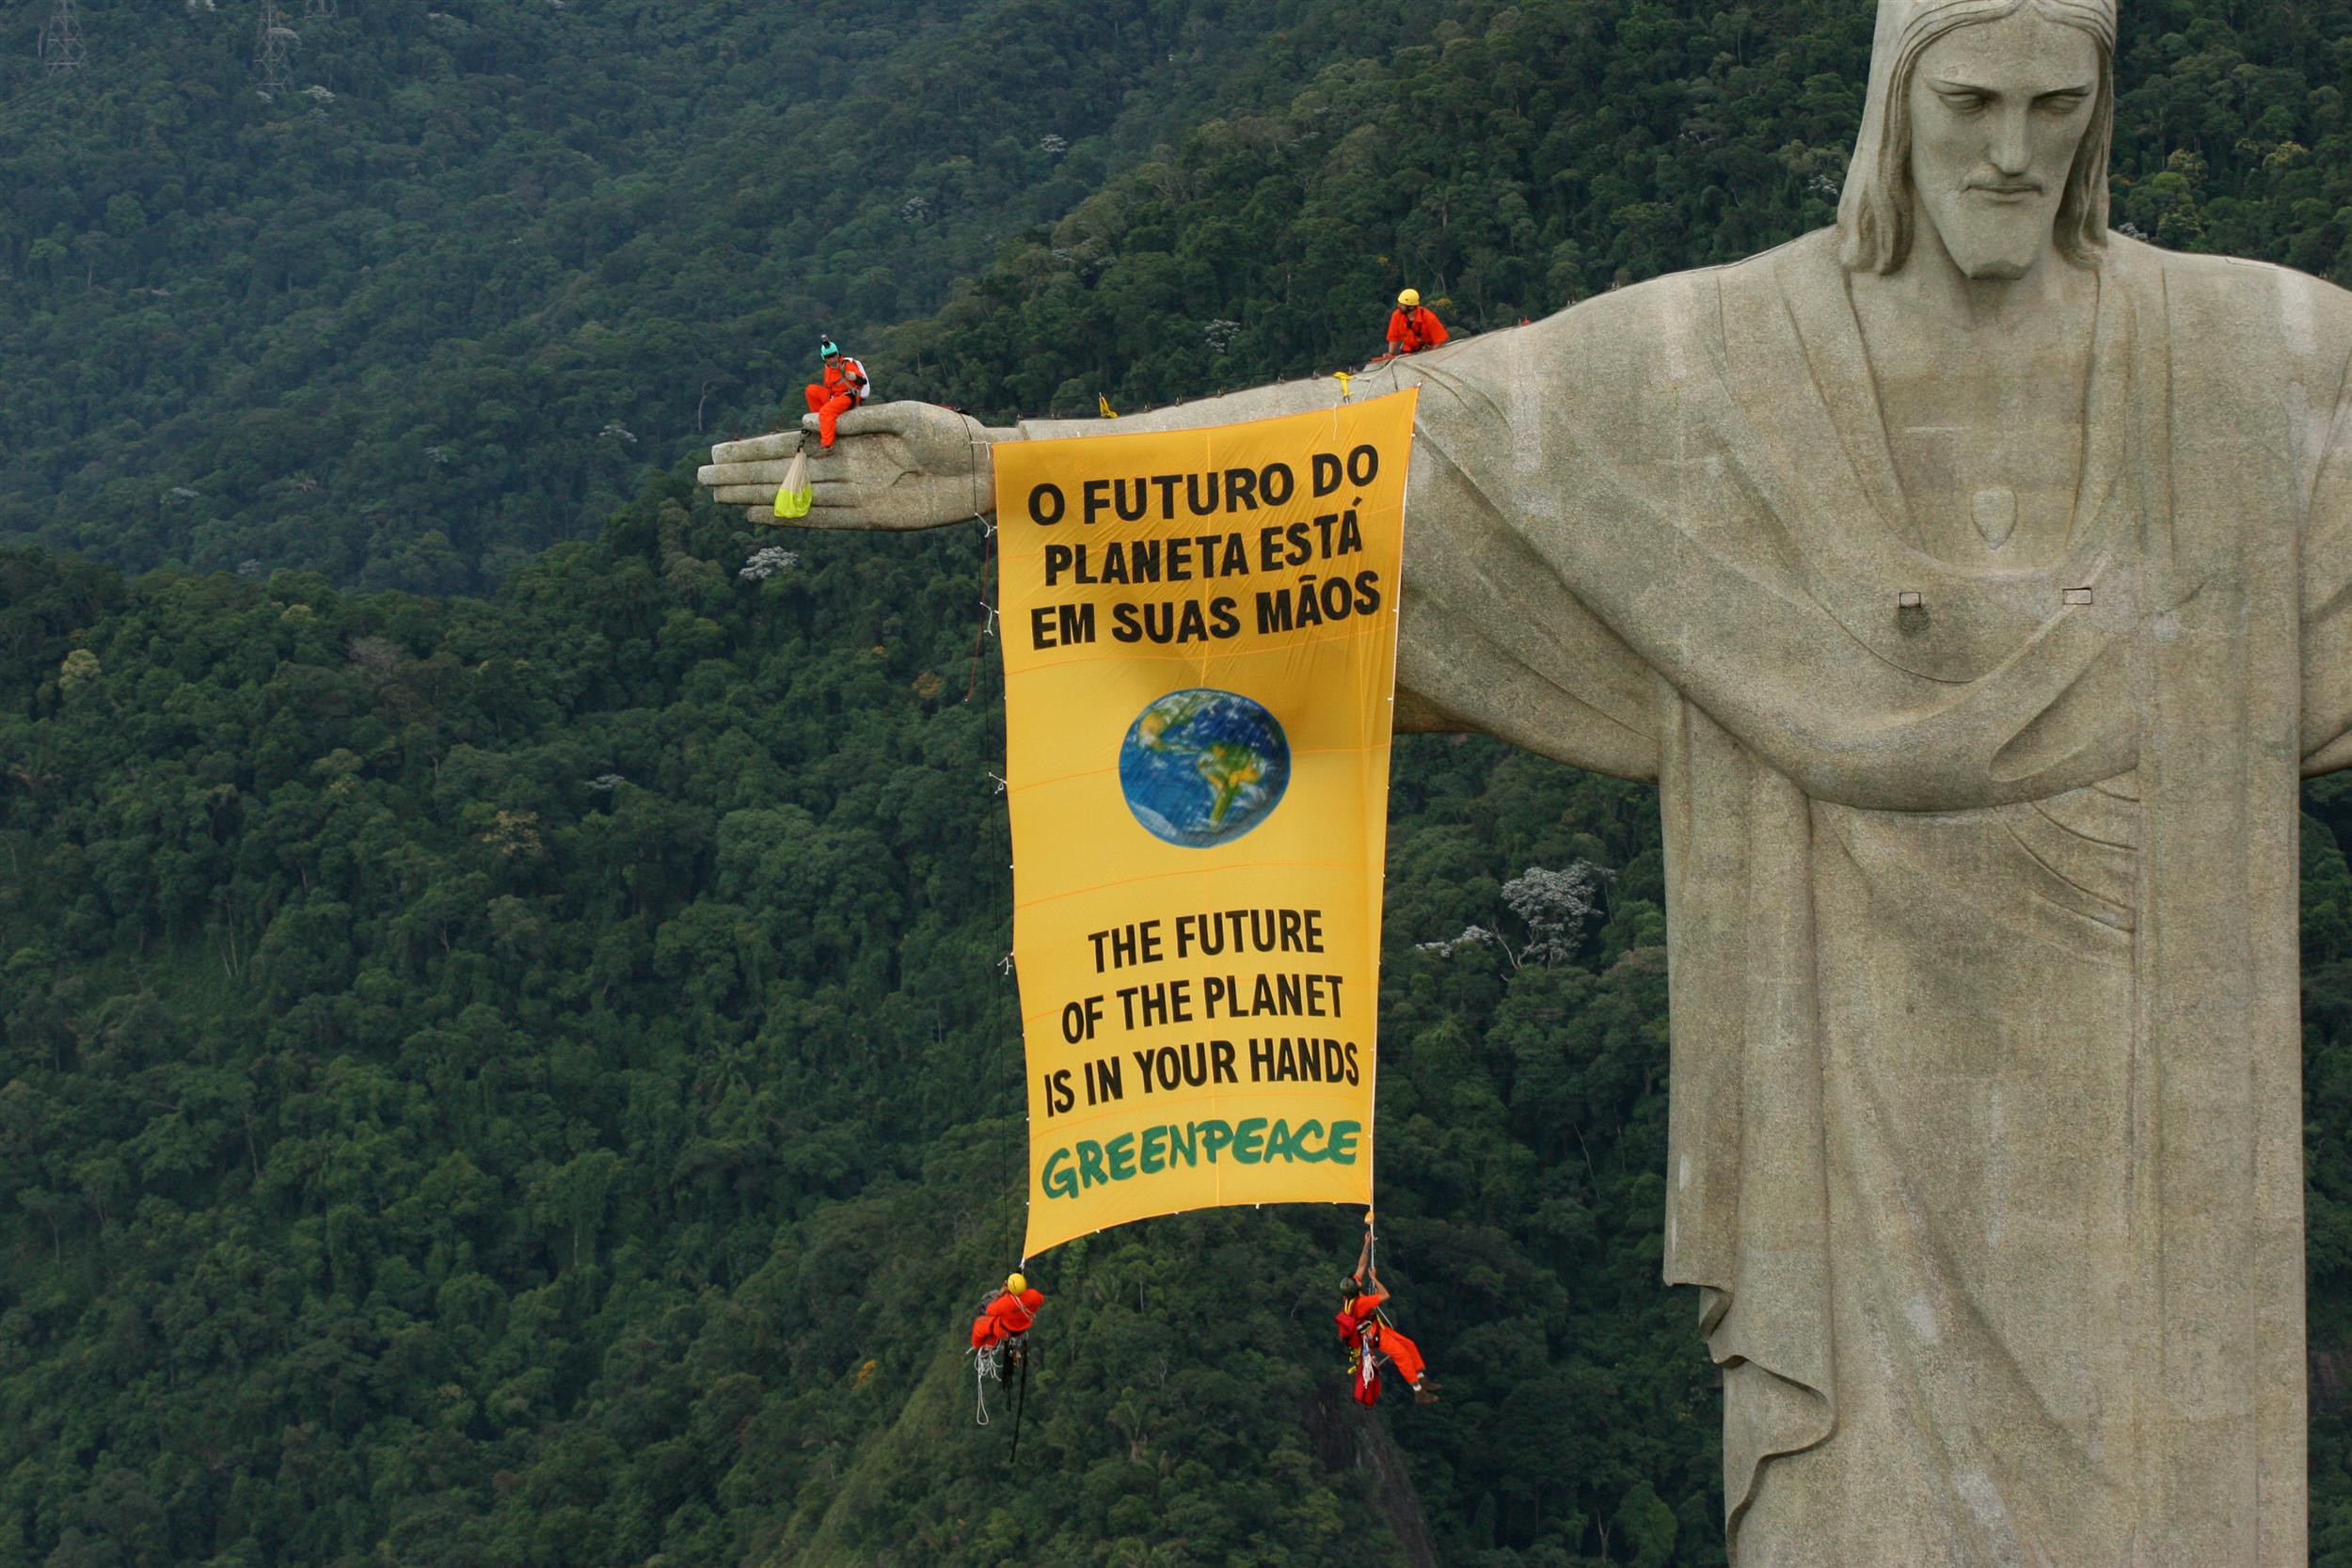 Greenpeace activists unfurl a banner from the famous Christ the Redeemer statue in Rio de Janeiro to call on governments to protect global biodiversity. Meanwhile, one of the activists tried to parachute from the statue, but had to rappel down. The action corresponds with the timing of the Convention of Biological Diversity (CBD) in Curitiba, Brazil, where representatives from 188 countries discuss the protection of biodiversity.